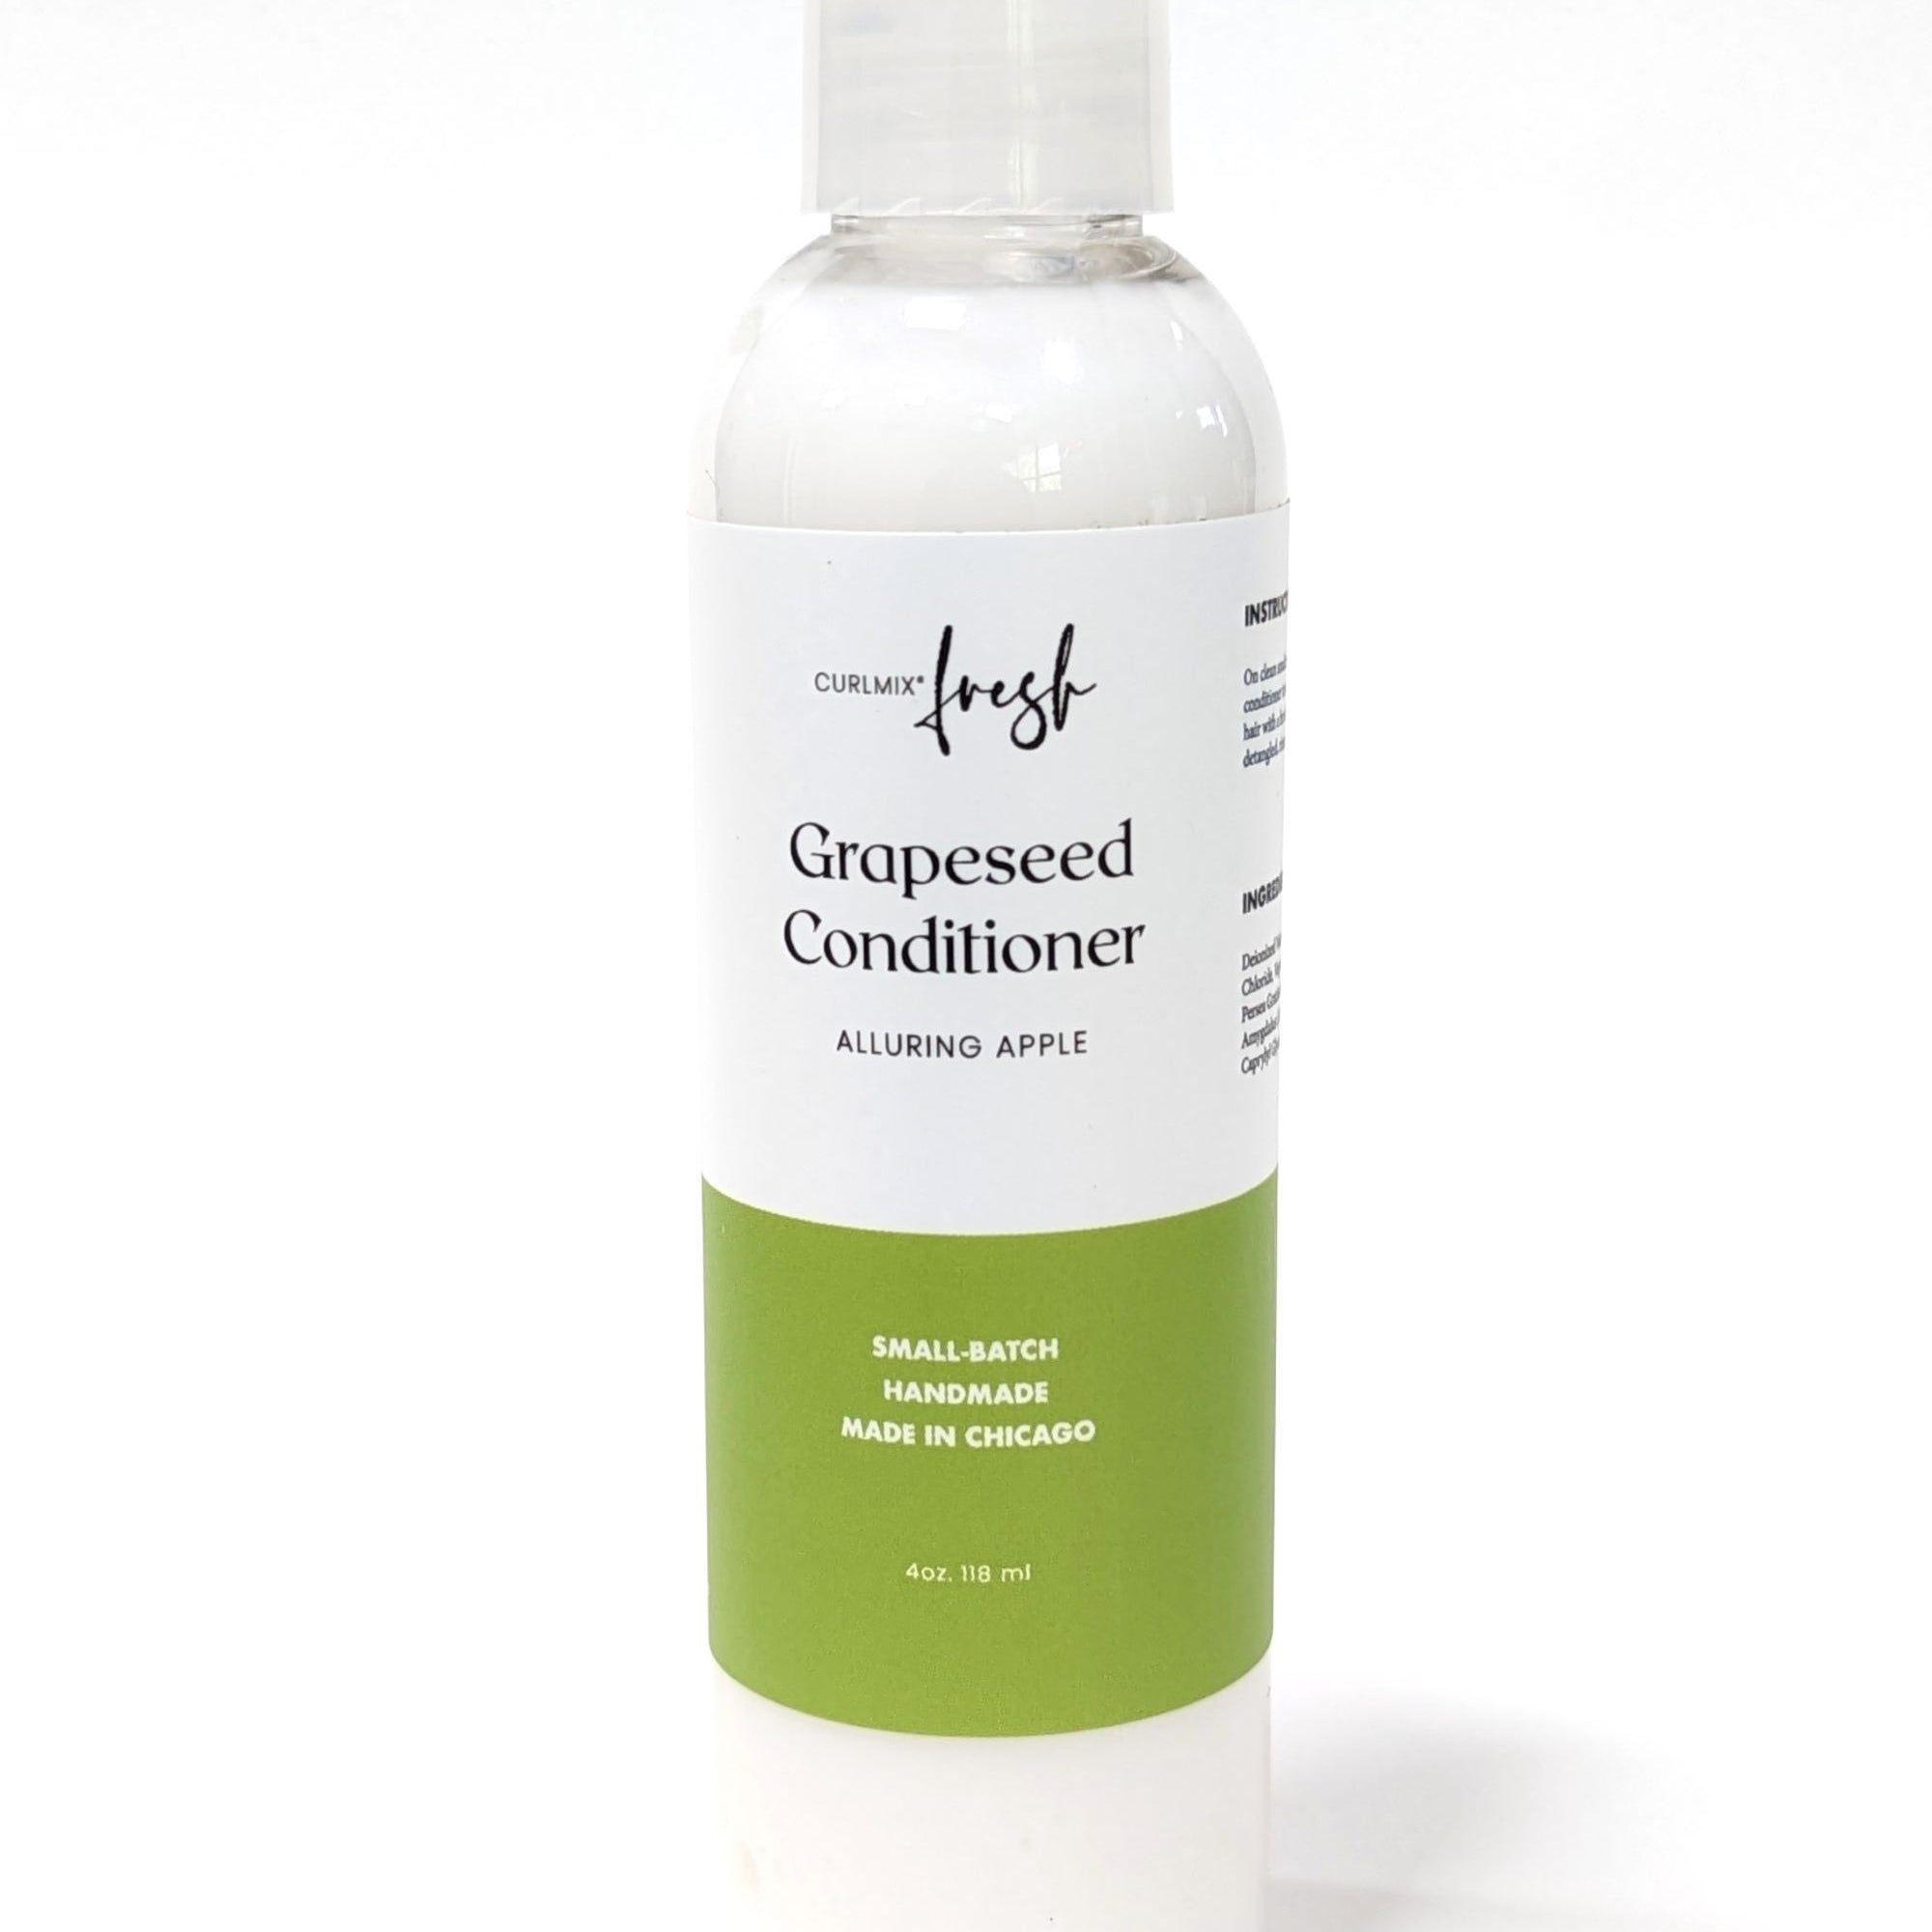 Grapeseed Conditioner Alluring Apple CurlMix Fresh